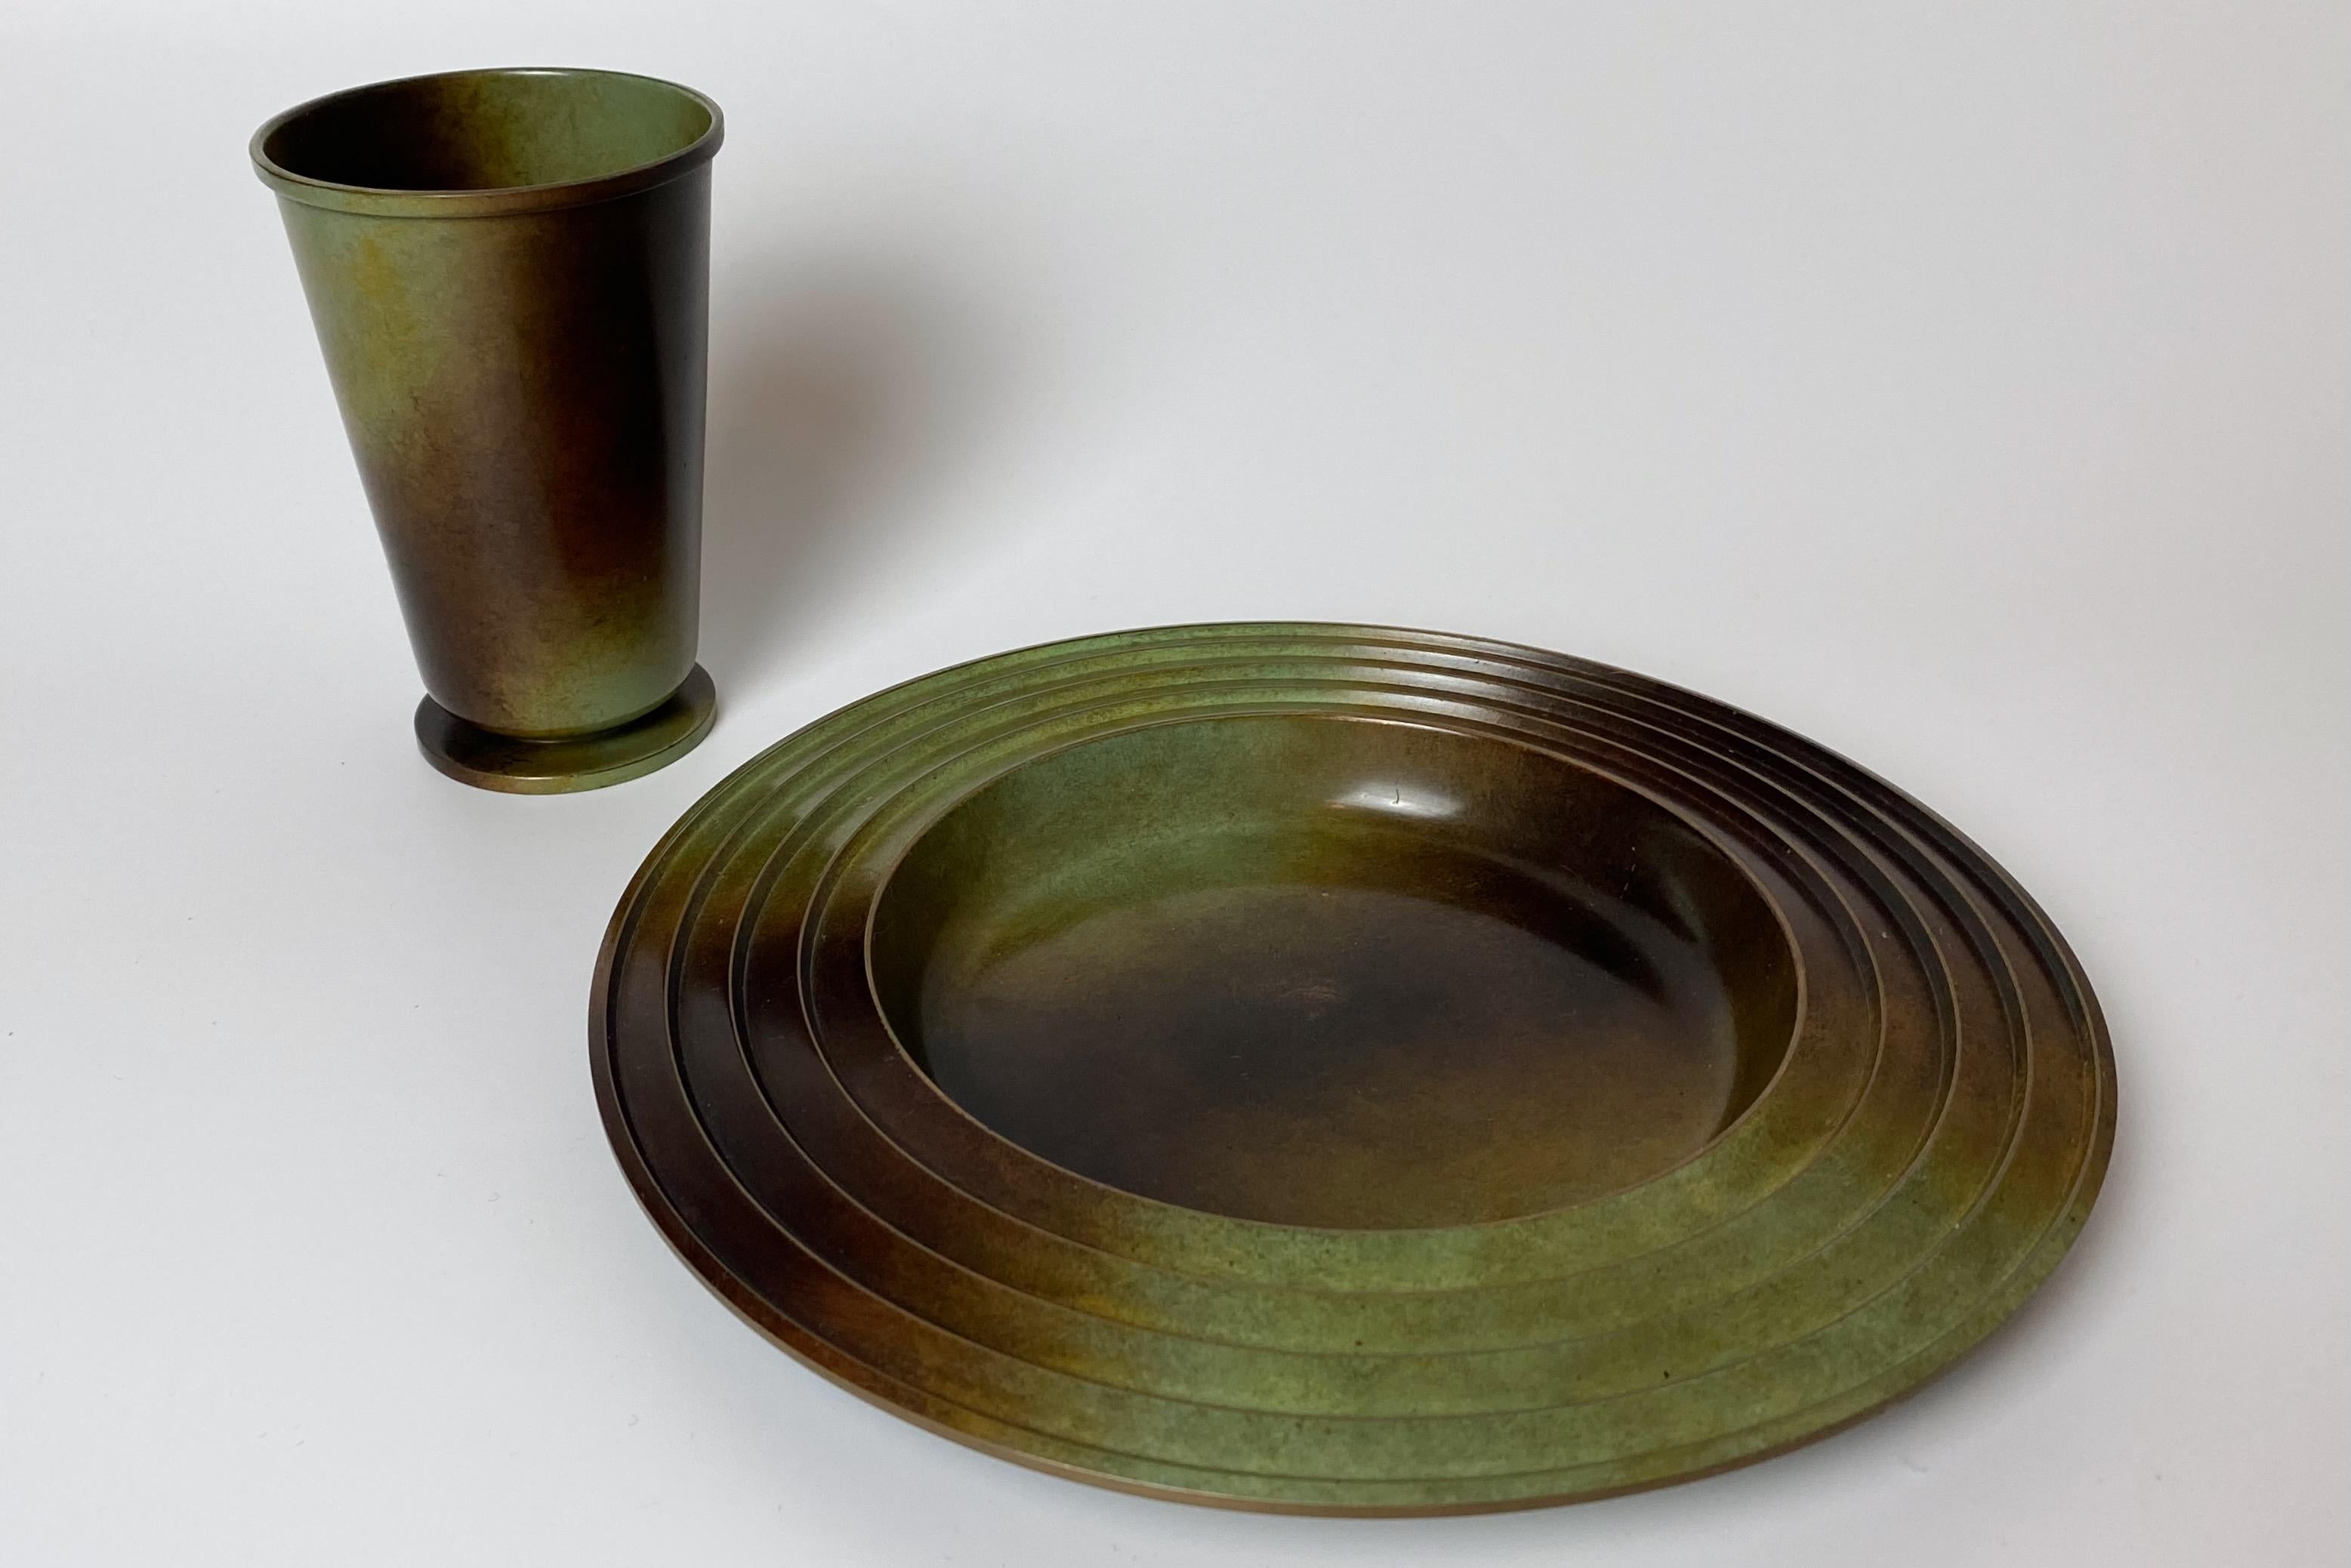 Beautiful set of a Patinated bronze Plate and Vase by Ystad Brons, Sweden, from the 1930s. The plate designed by Ivar Ålenius-Björk. Very good condition with small marks of wear.

Country: Sweden

Maker: Ystad Metall

Designer: Ivar